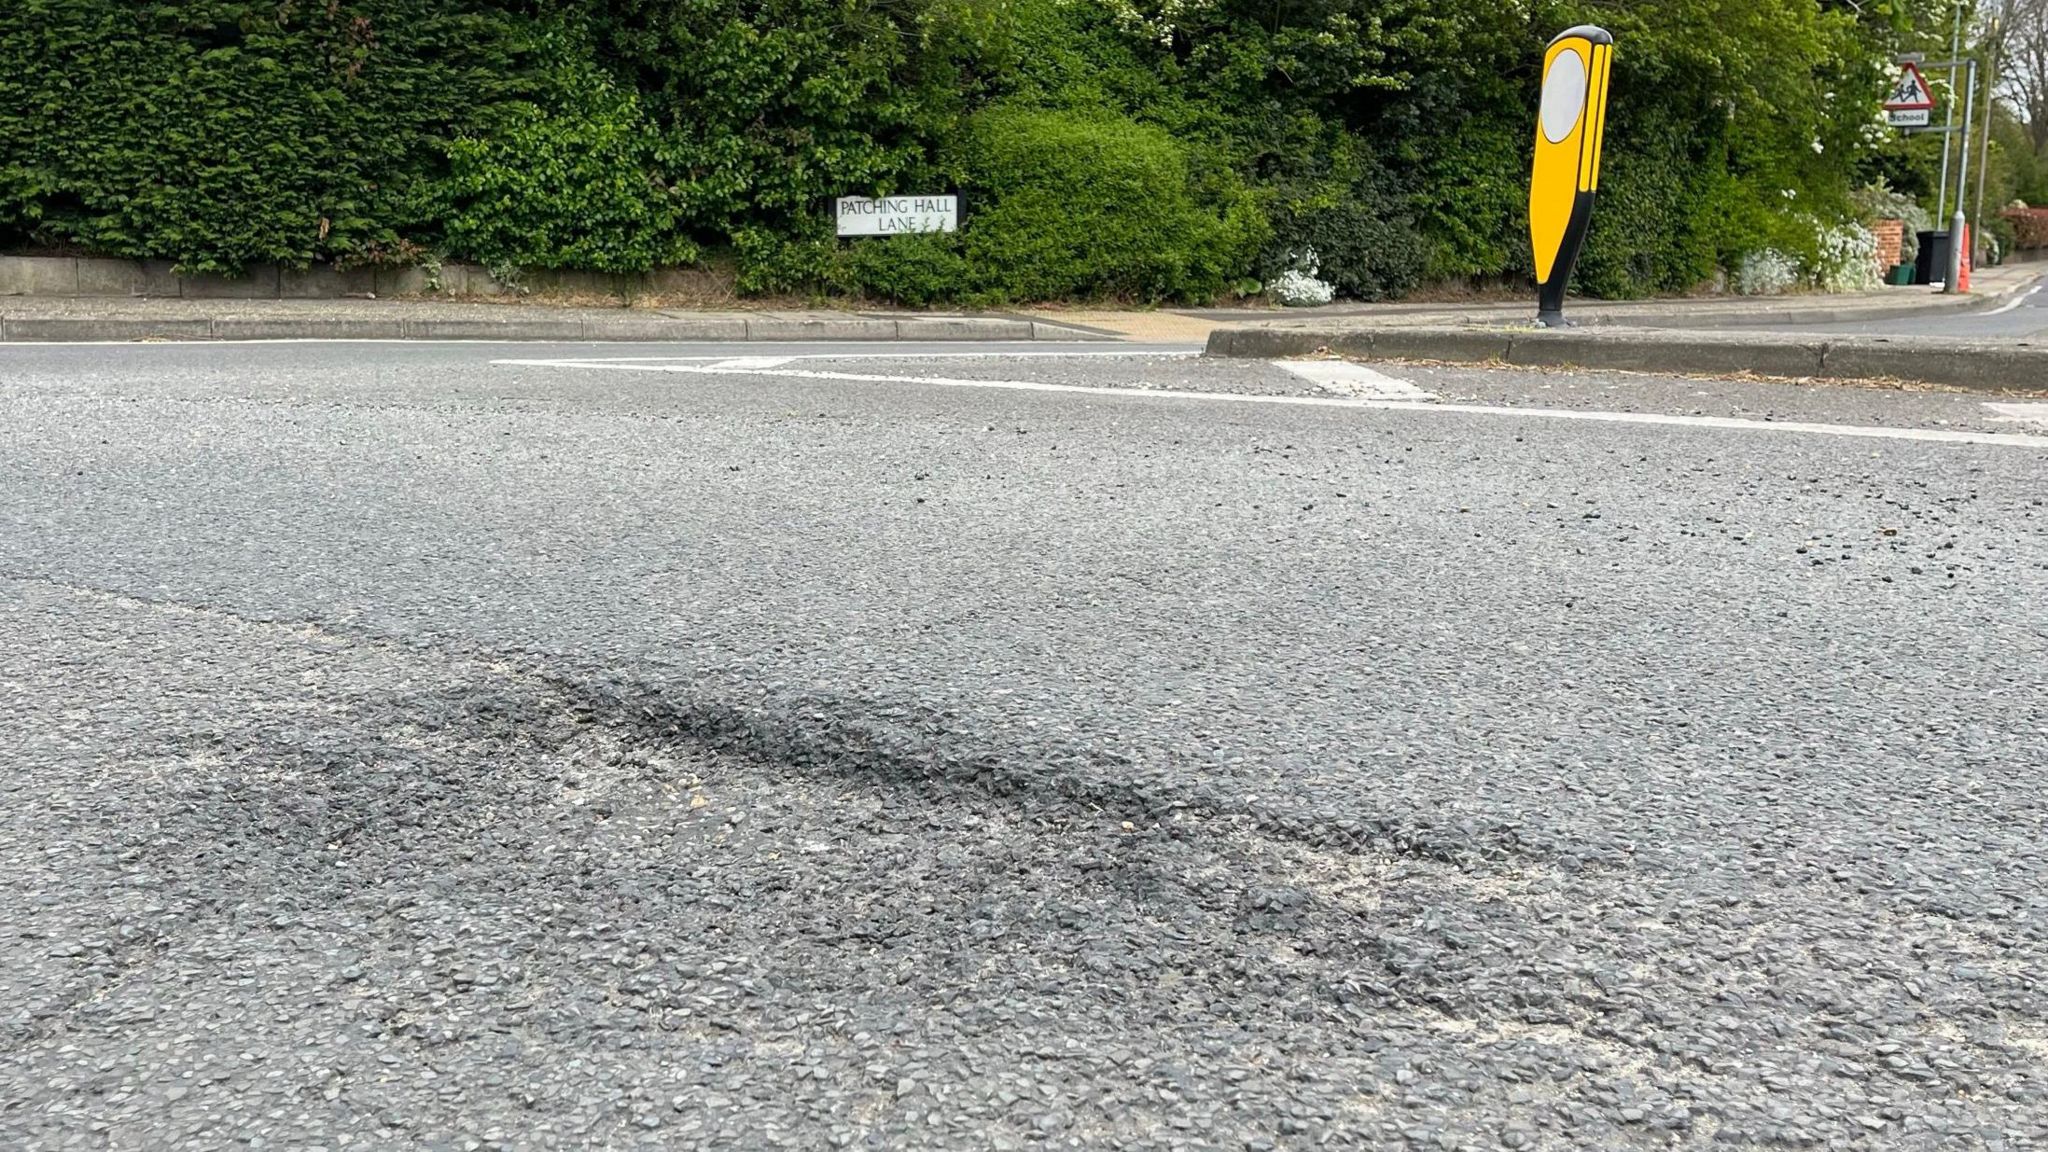 A pothole in the foreground with Patching Hall Lane road sign in the background